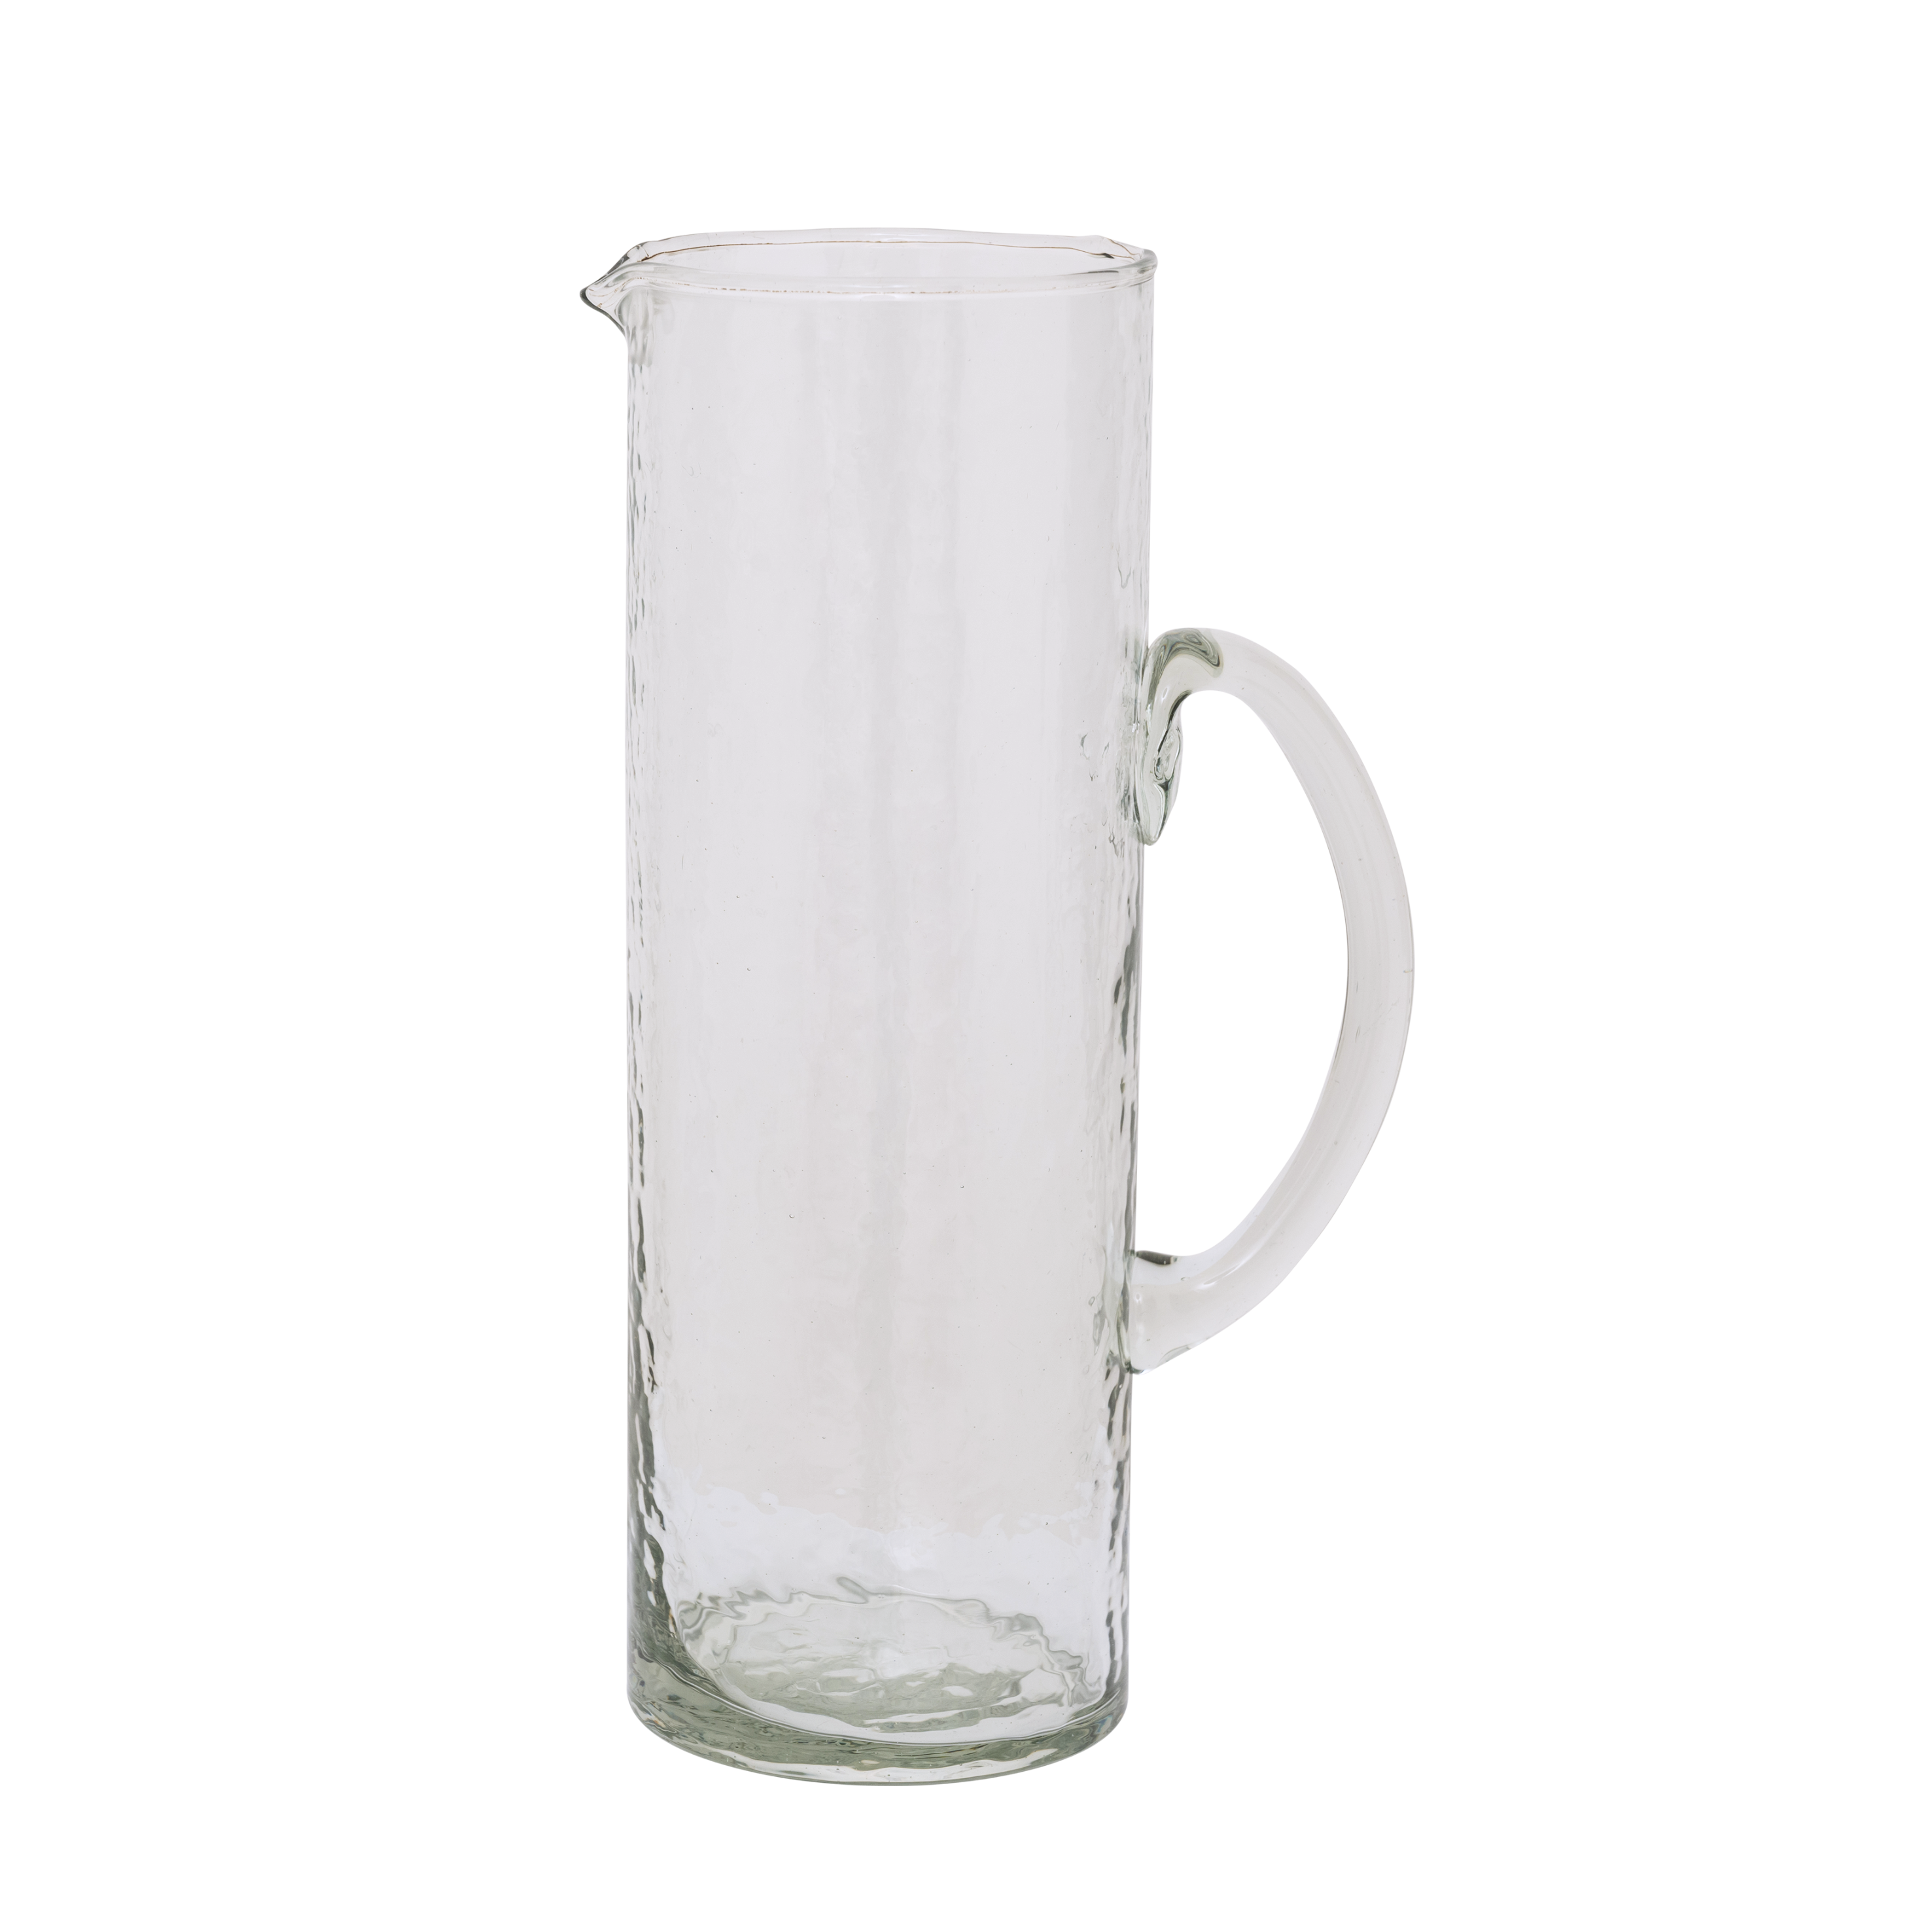 Urban Nature Culture Jug Hammered Glass - Recycled Glass